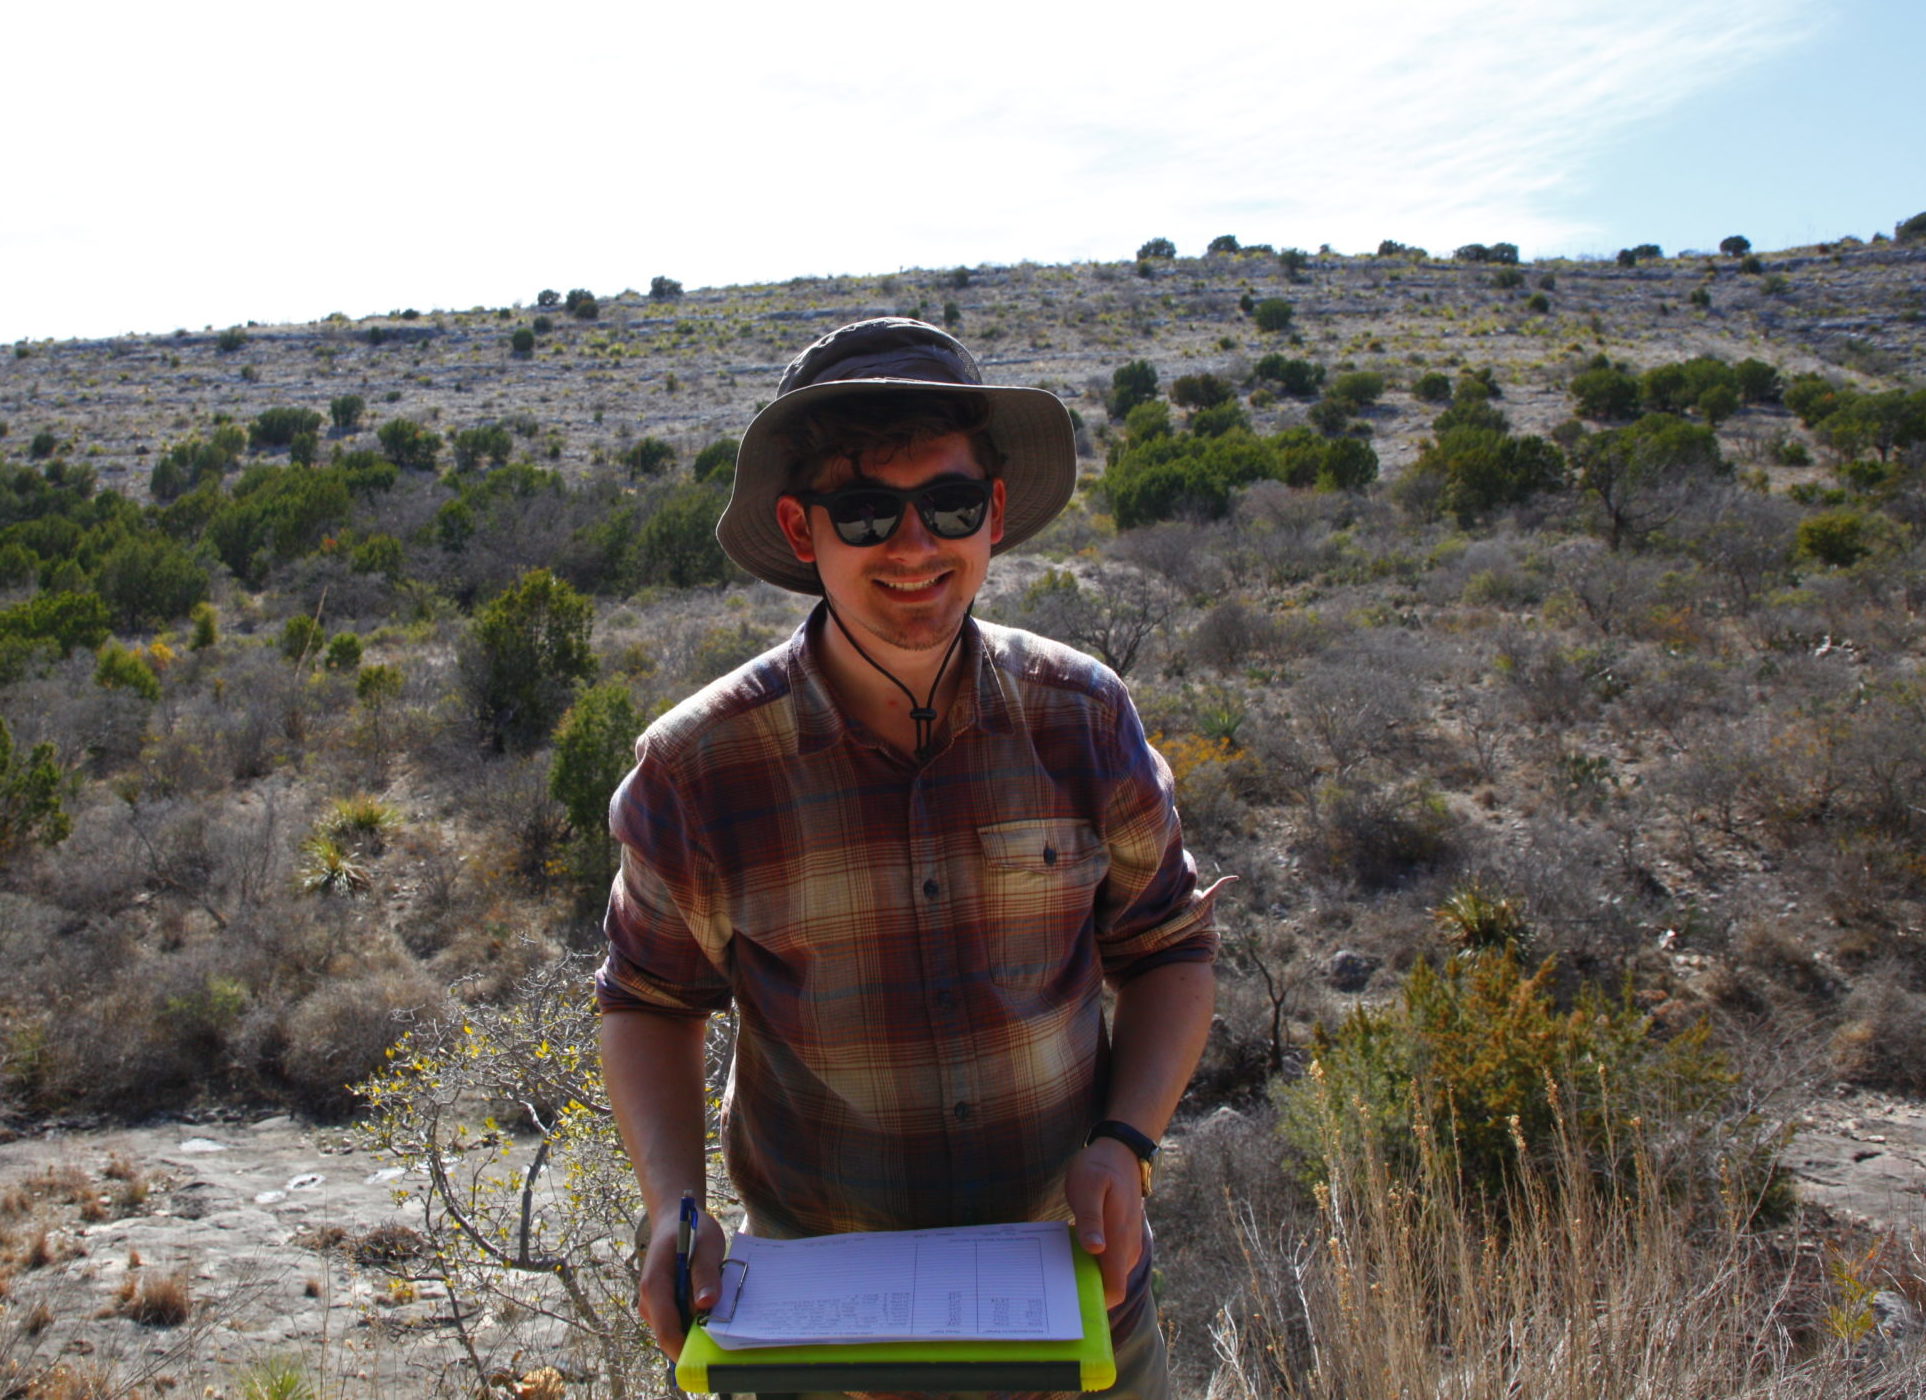 Rudy working on photo logs for the rock art sites at Hudspeth River Ranch.